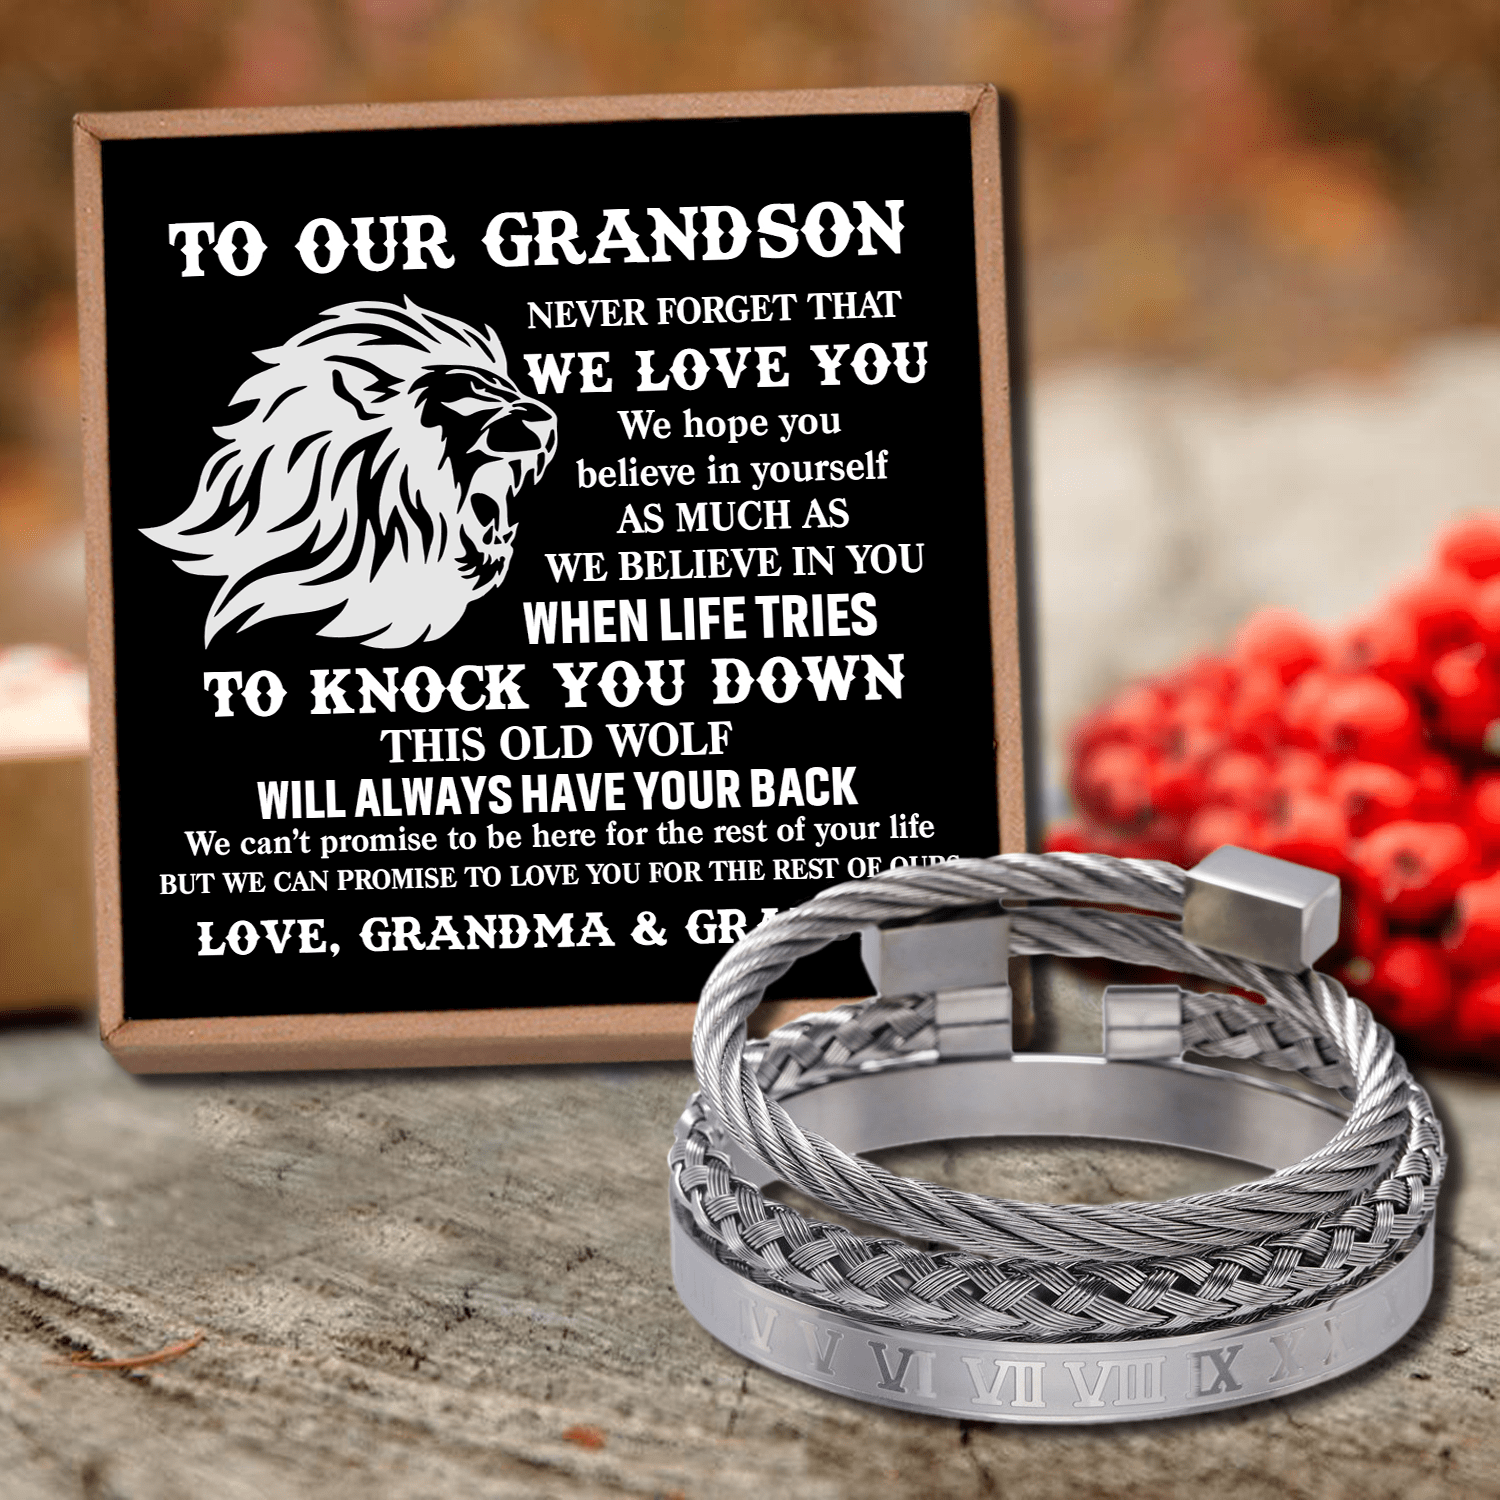 Bracelets To Our Grandson - We Believe In You Roman Numeral Bracelet Set Silver GiveMe-Gifts